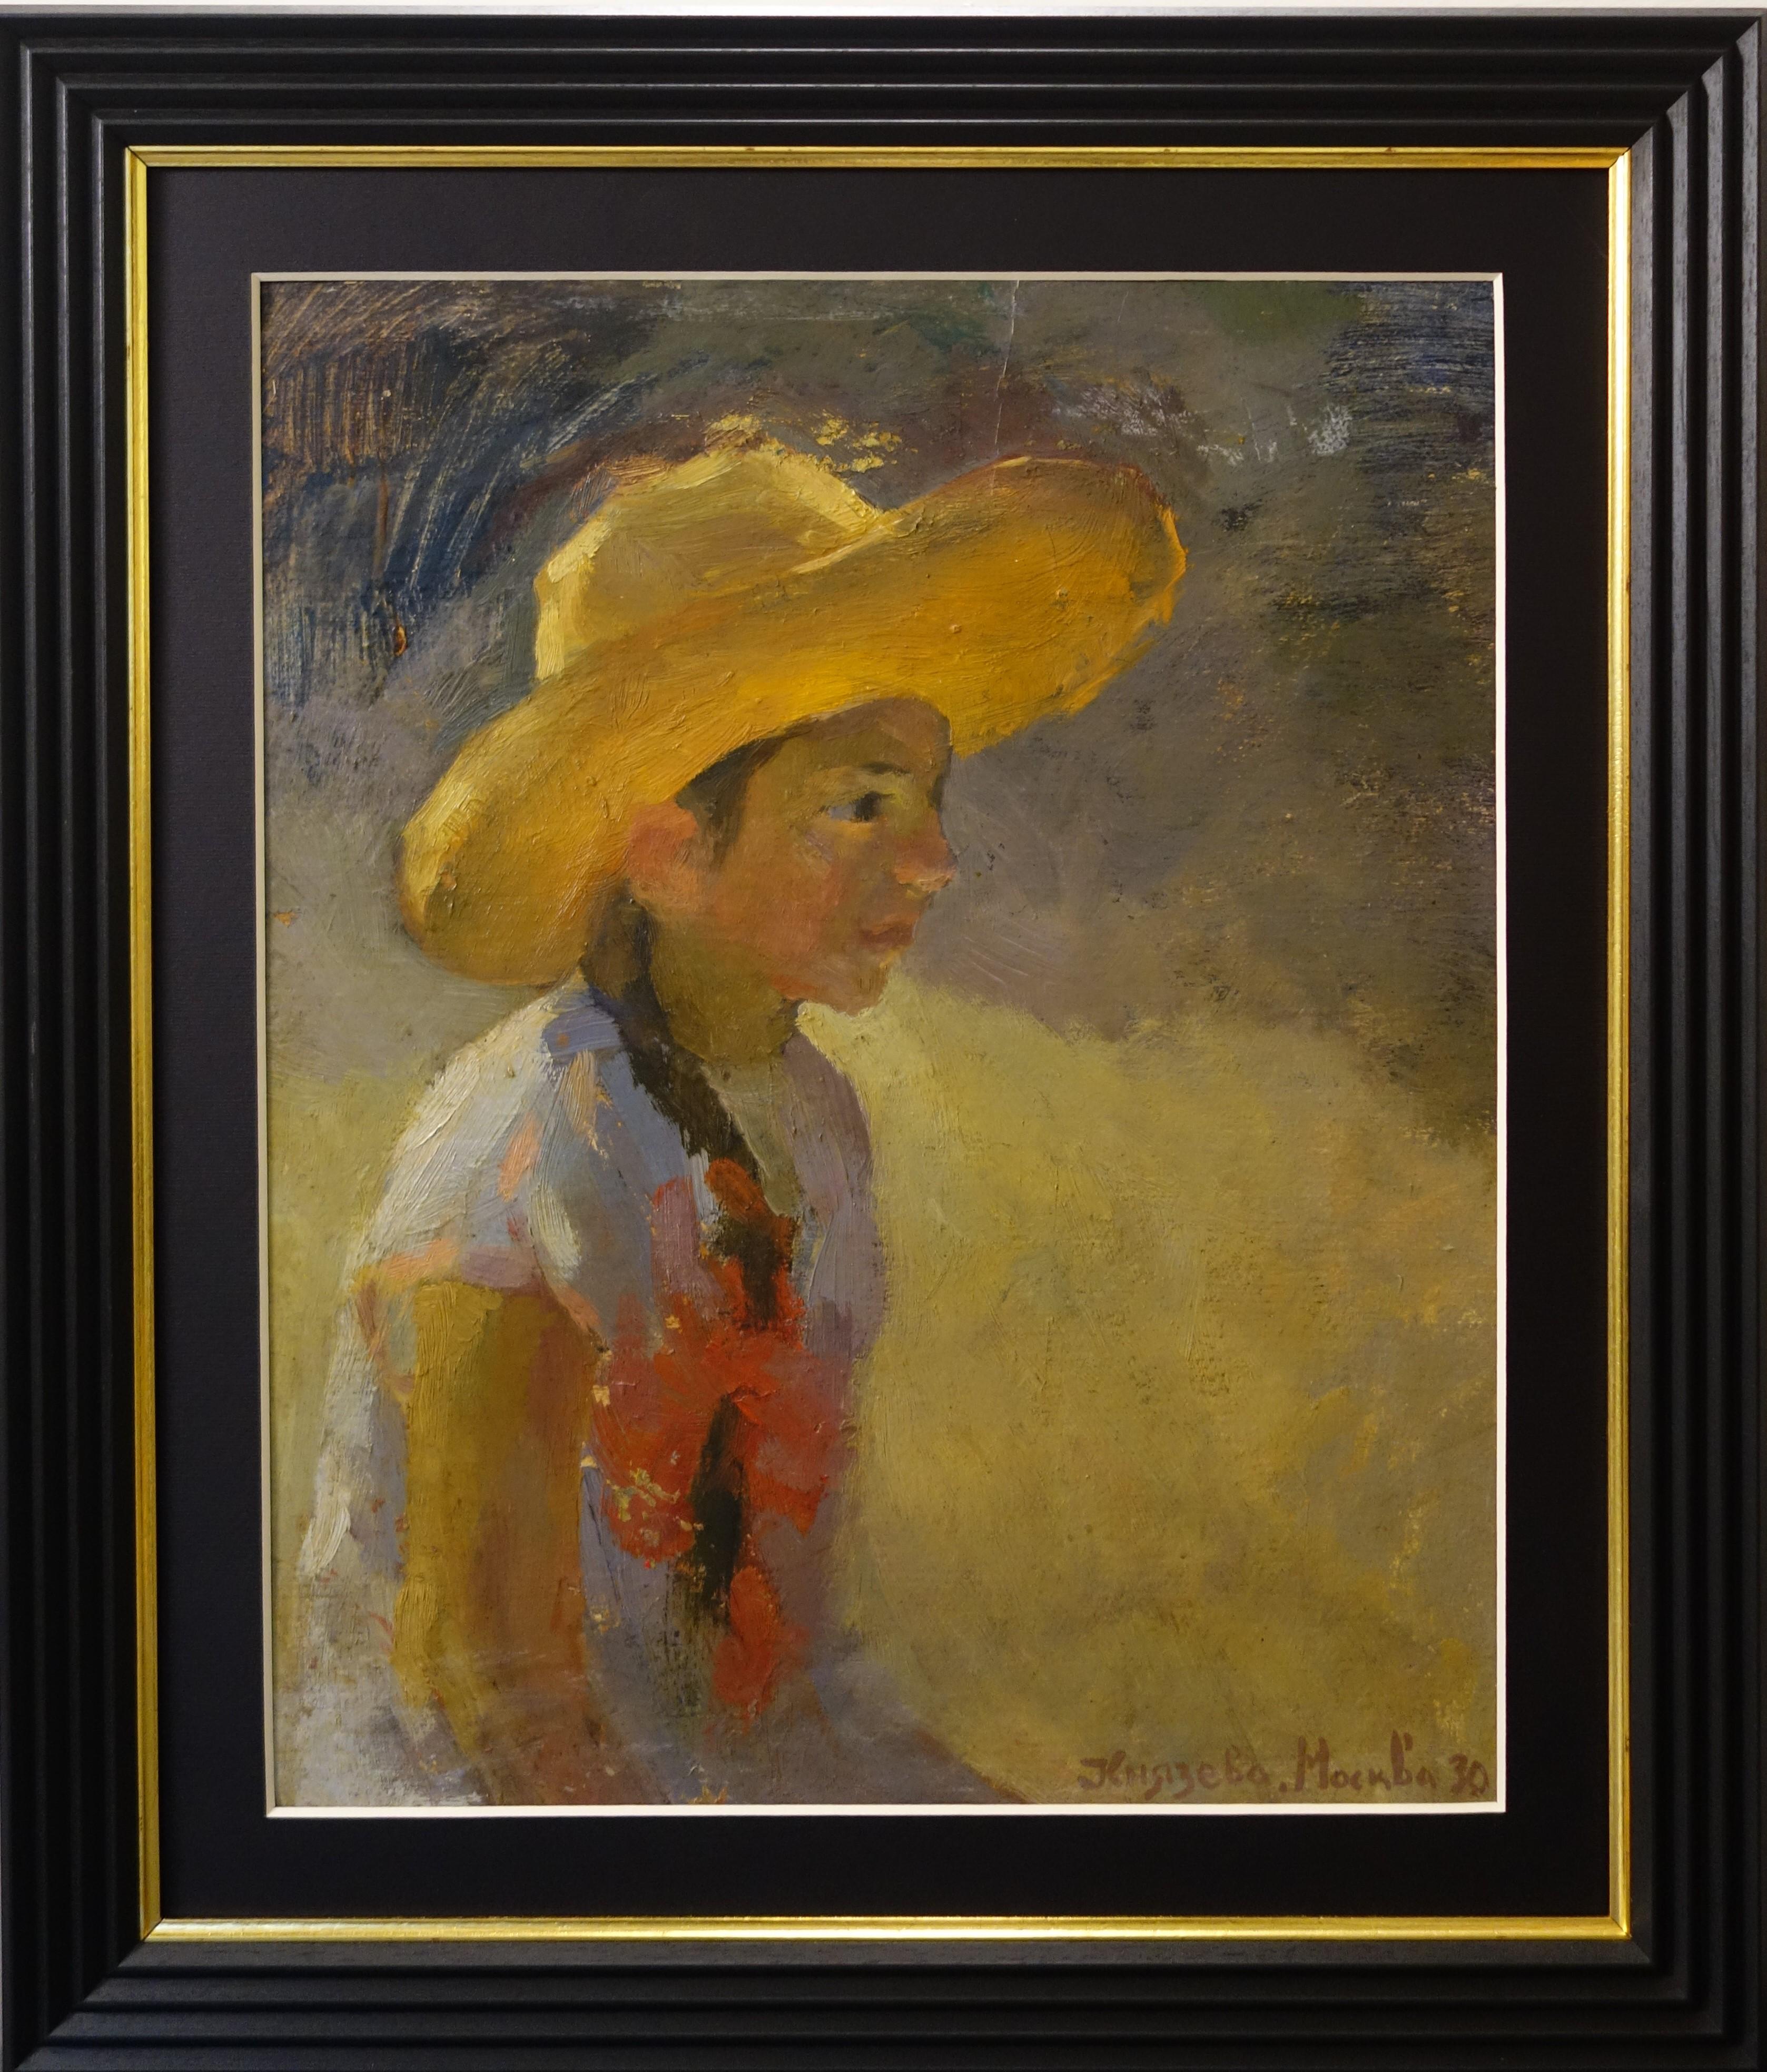 Unknown Portrait Painting - "Little girl with straw hat "  Child, Summer, Hat, 20th, impressionist, Russia  1930 